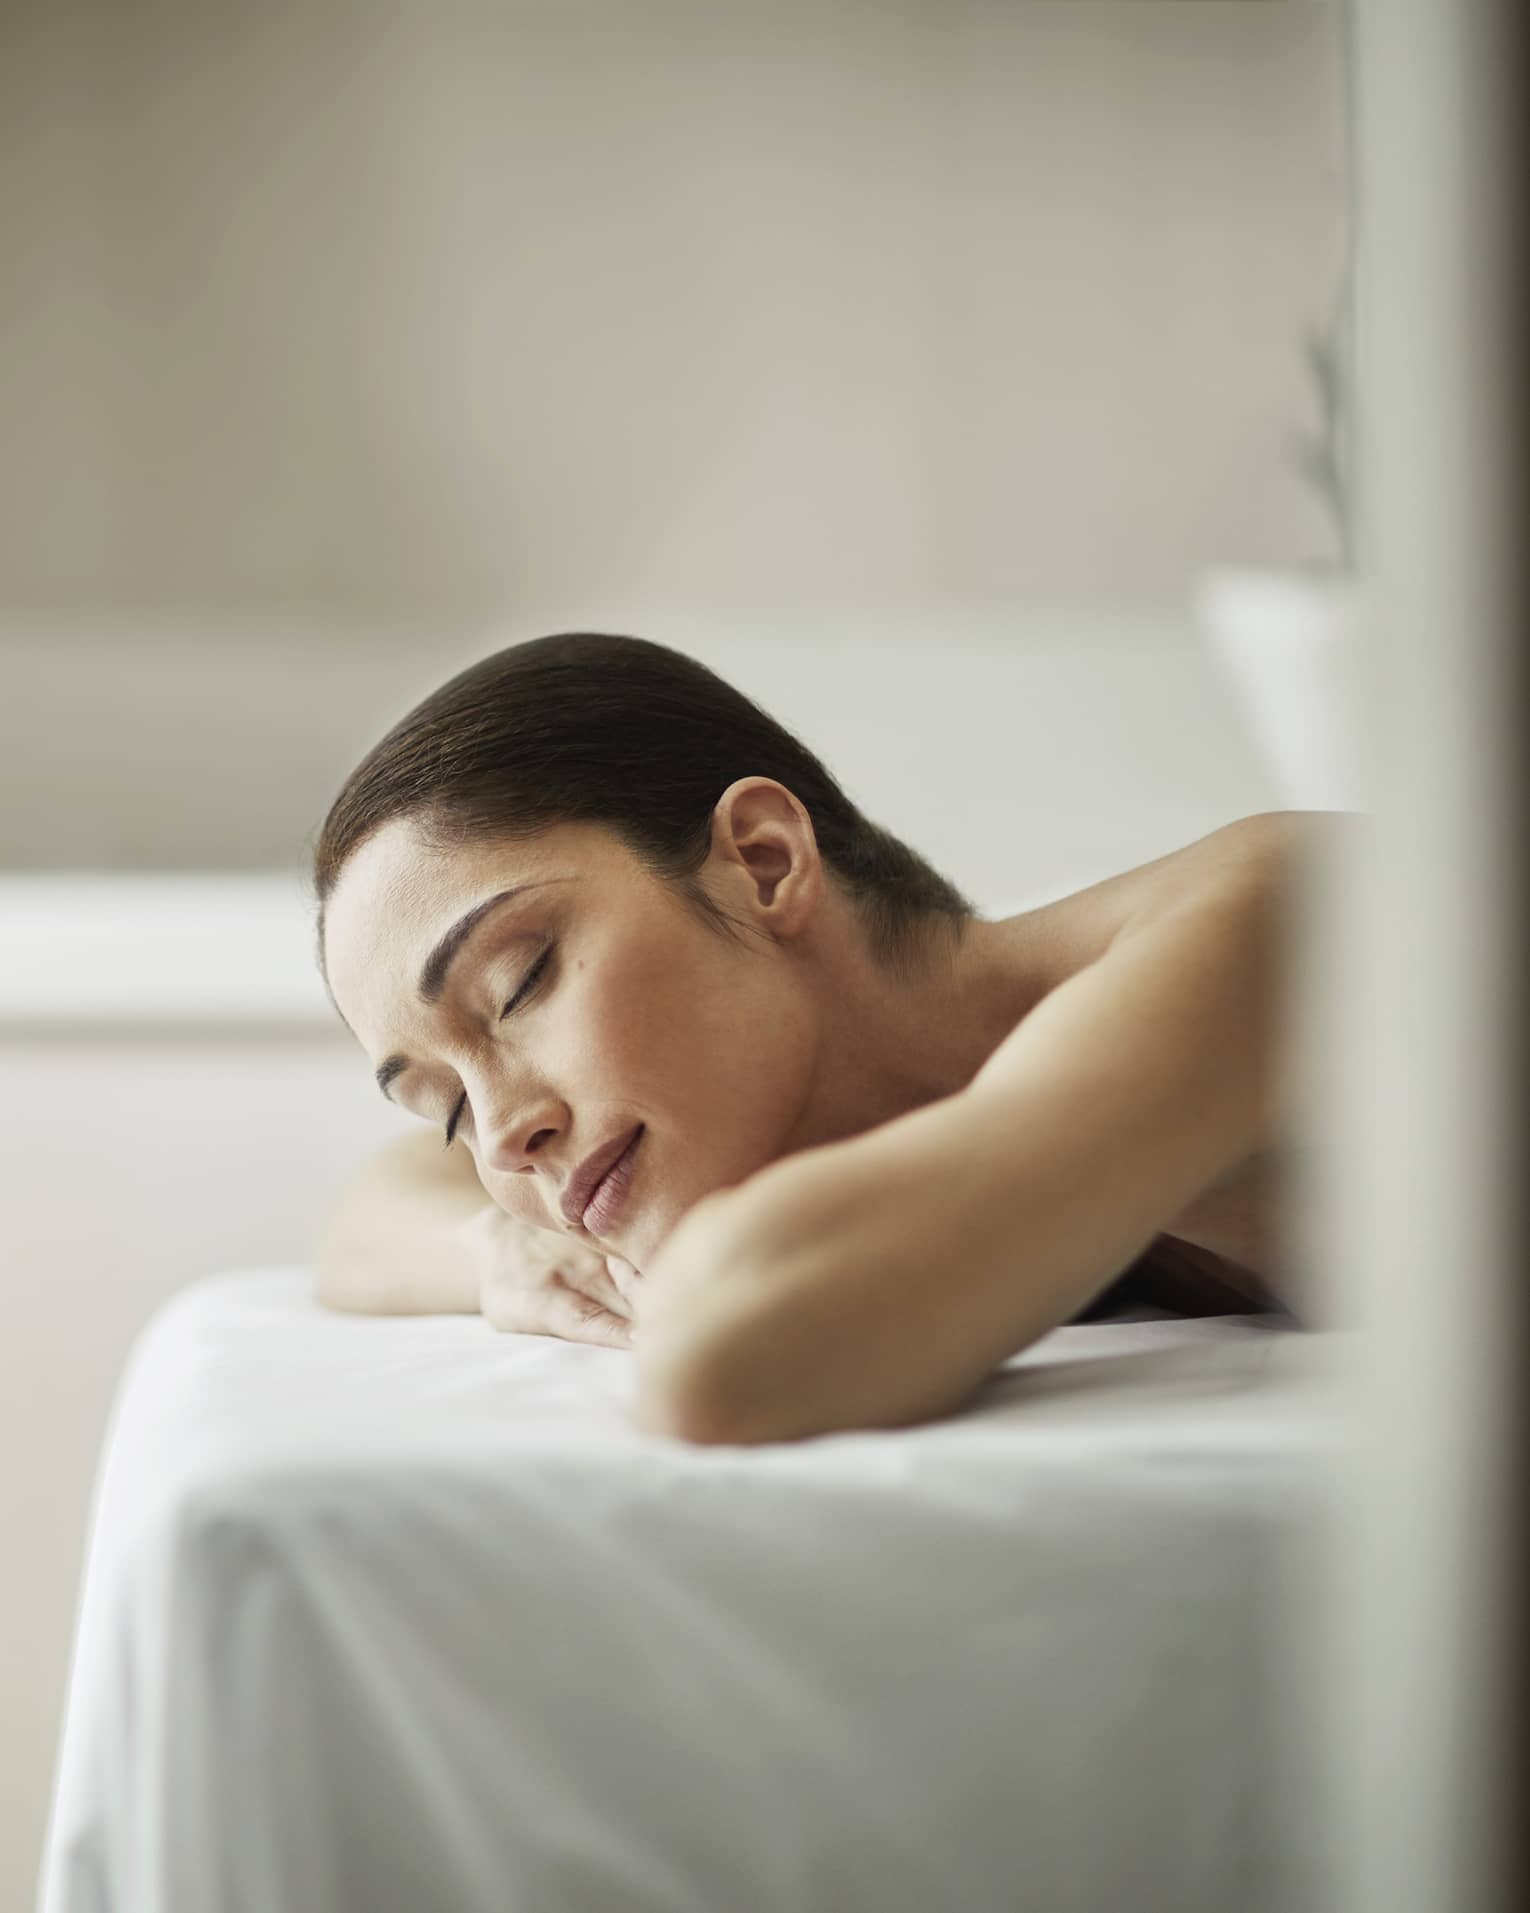 Woman smiles with eyes closed, rests head on arms as she lies on massage table with white sheet